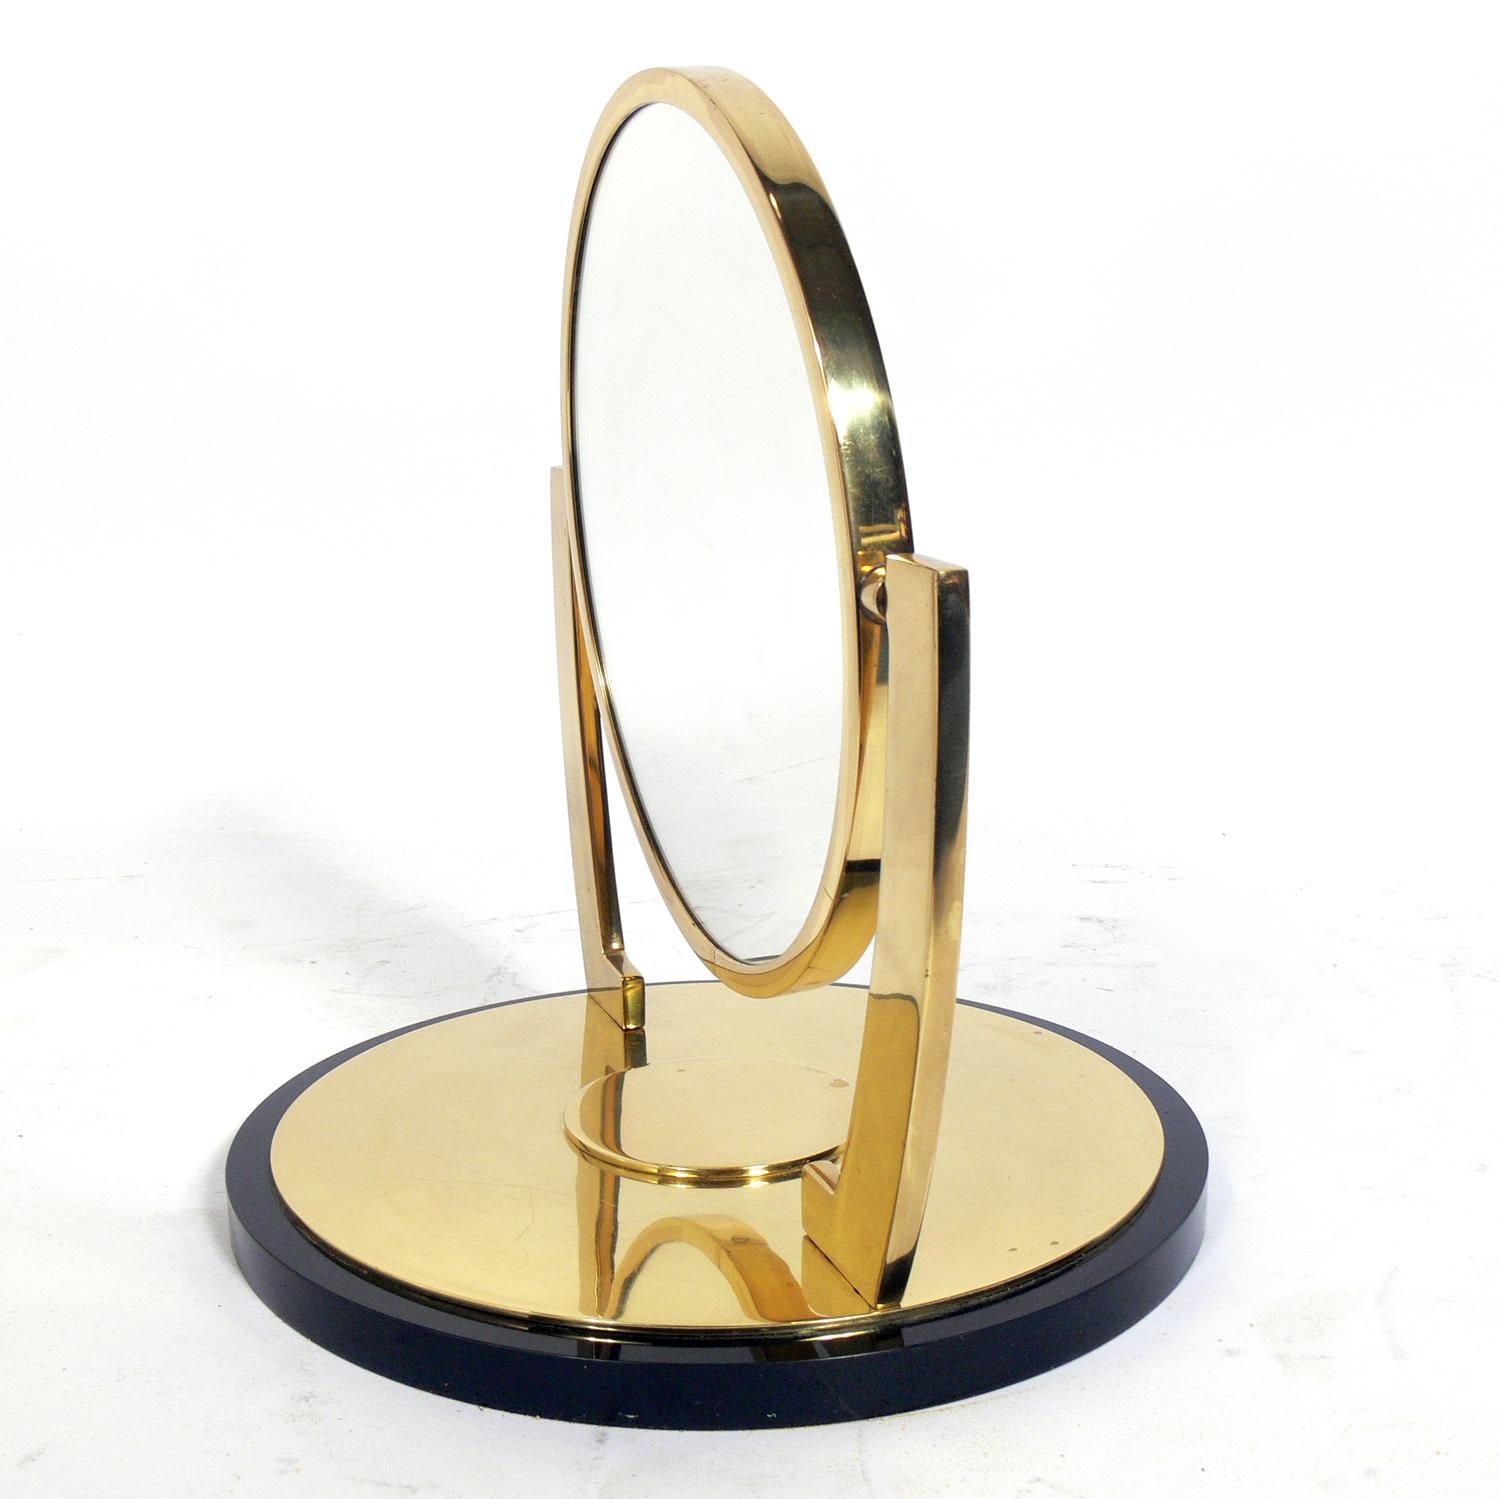 Glamorous brass vanity or table mirror, in the manner of Karl Springer, American, circa 1970s.